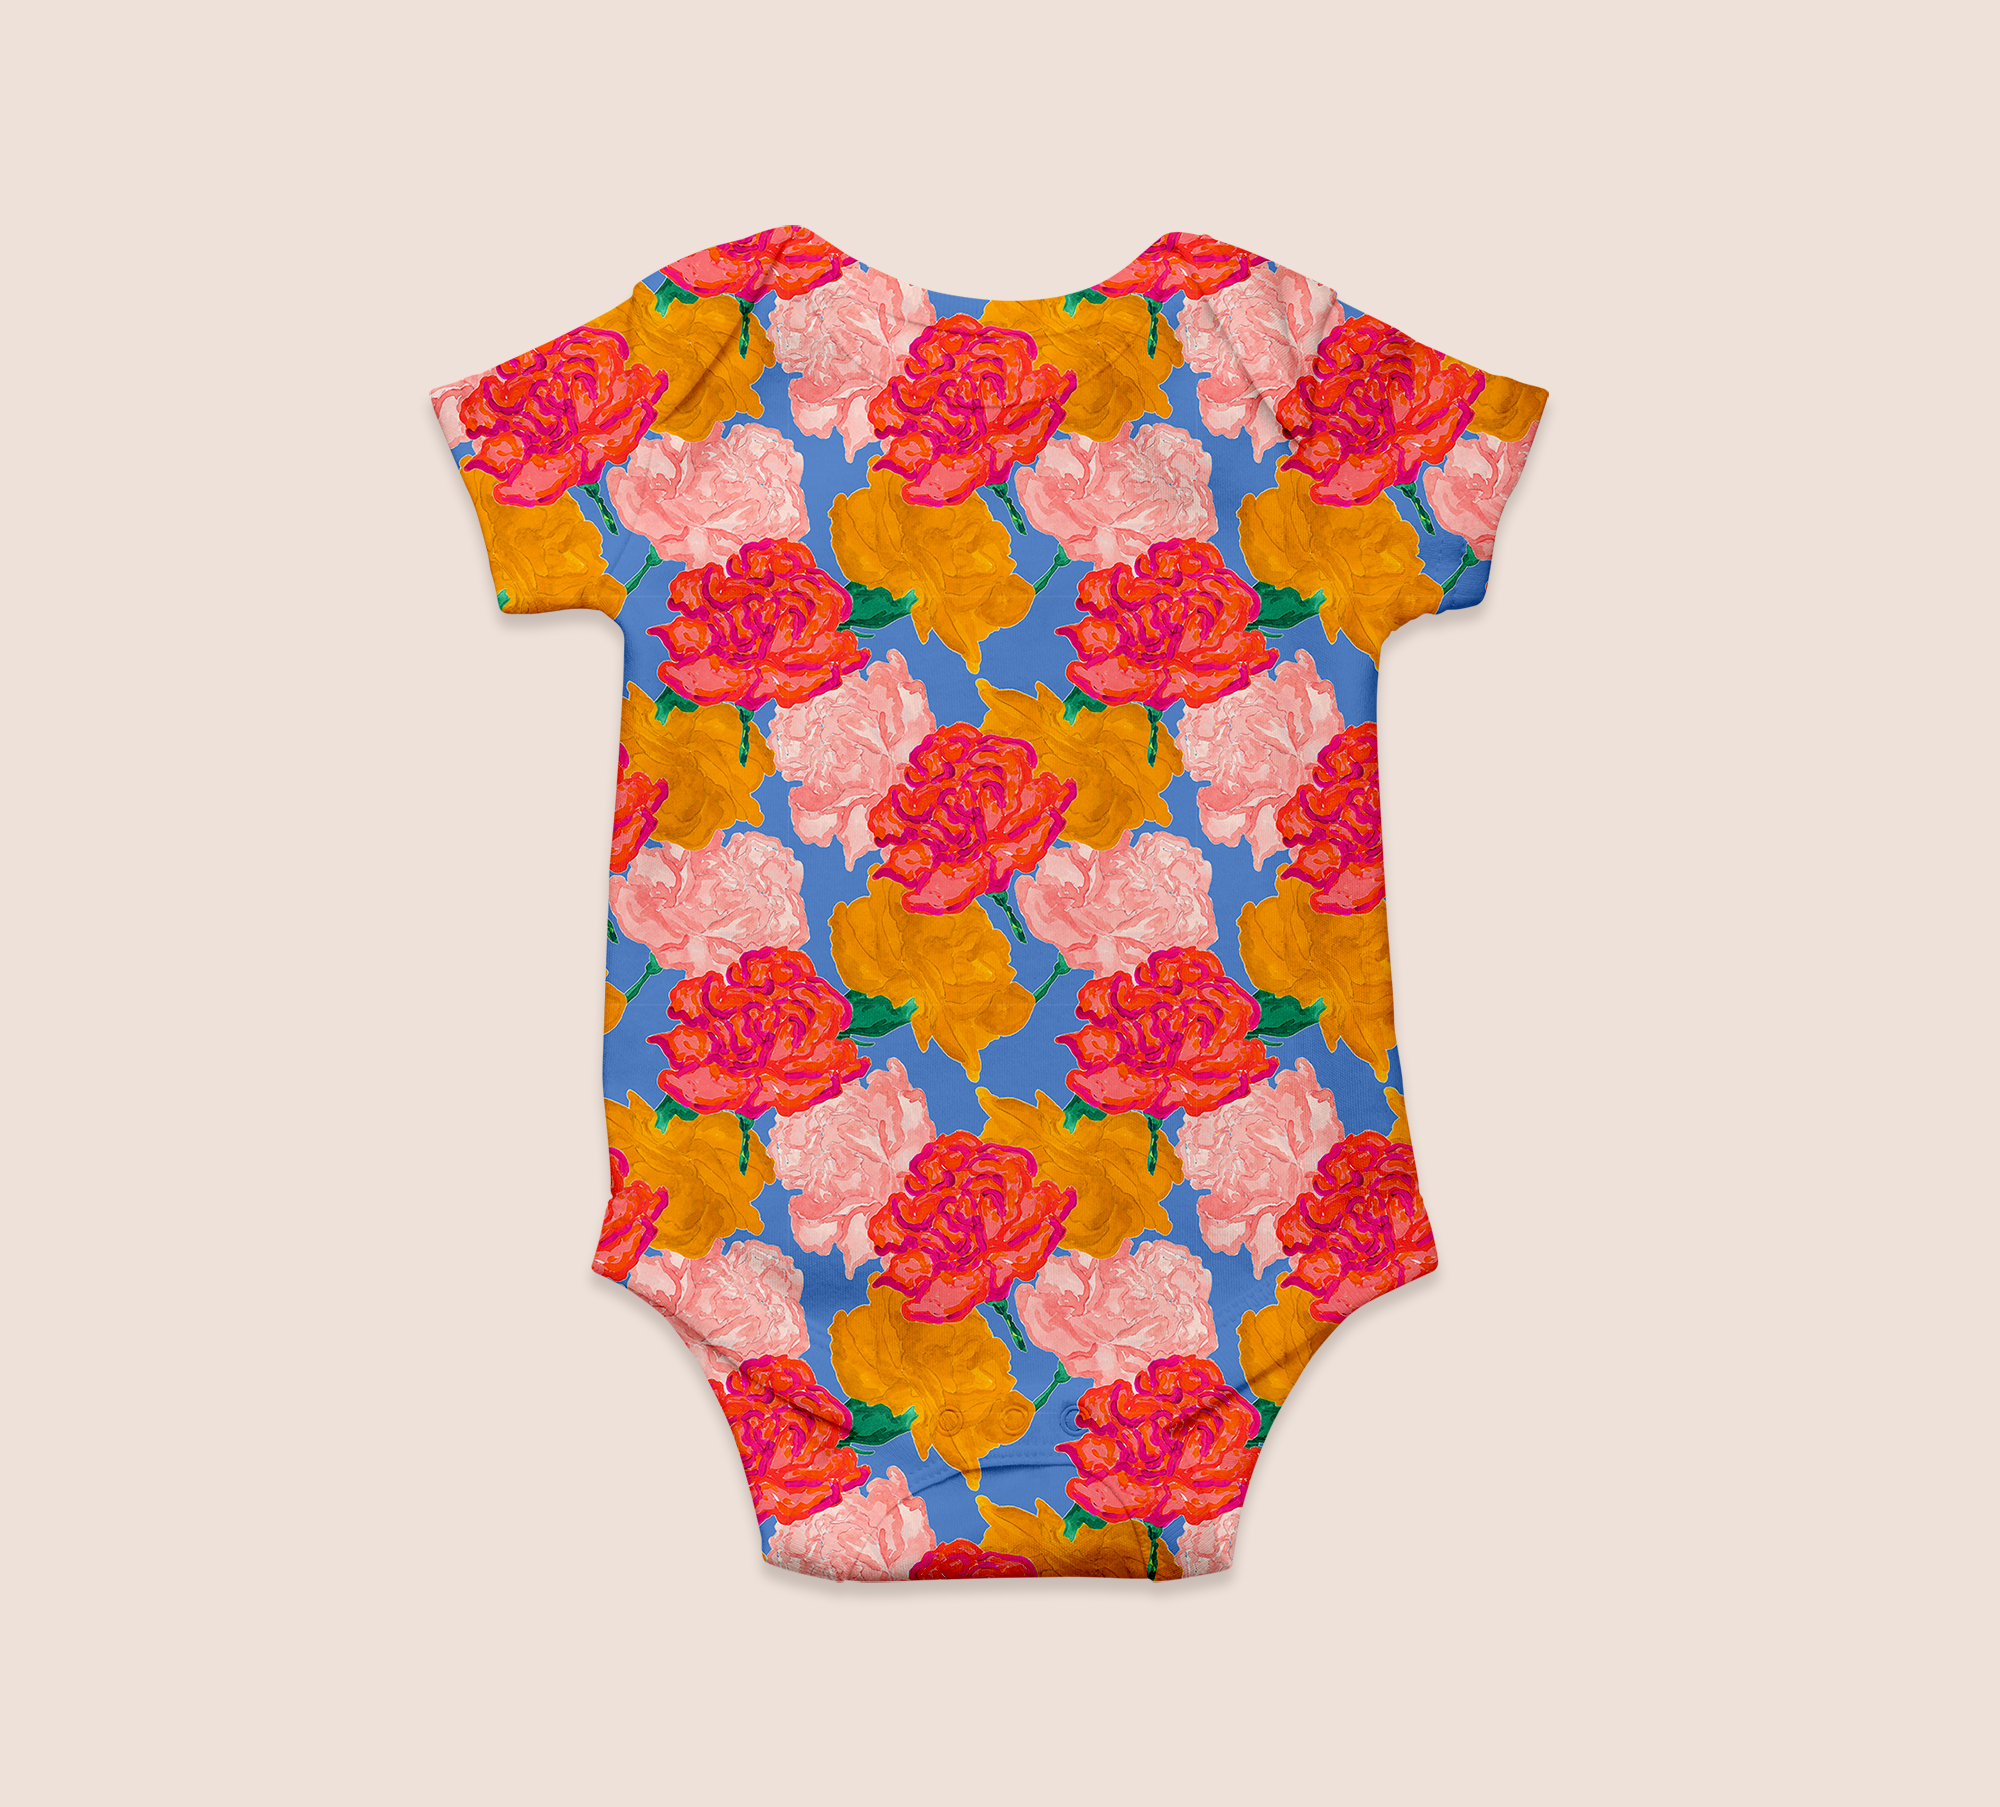 Coloured carnations in blue recycled fabric baby newborn